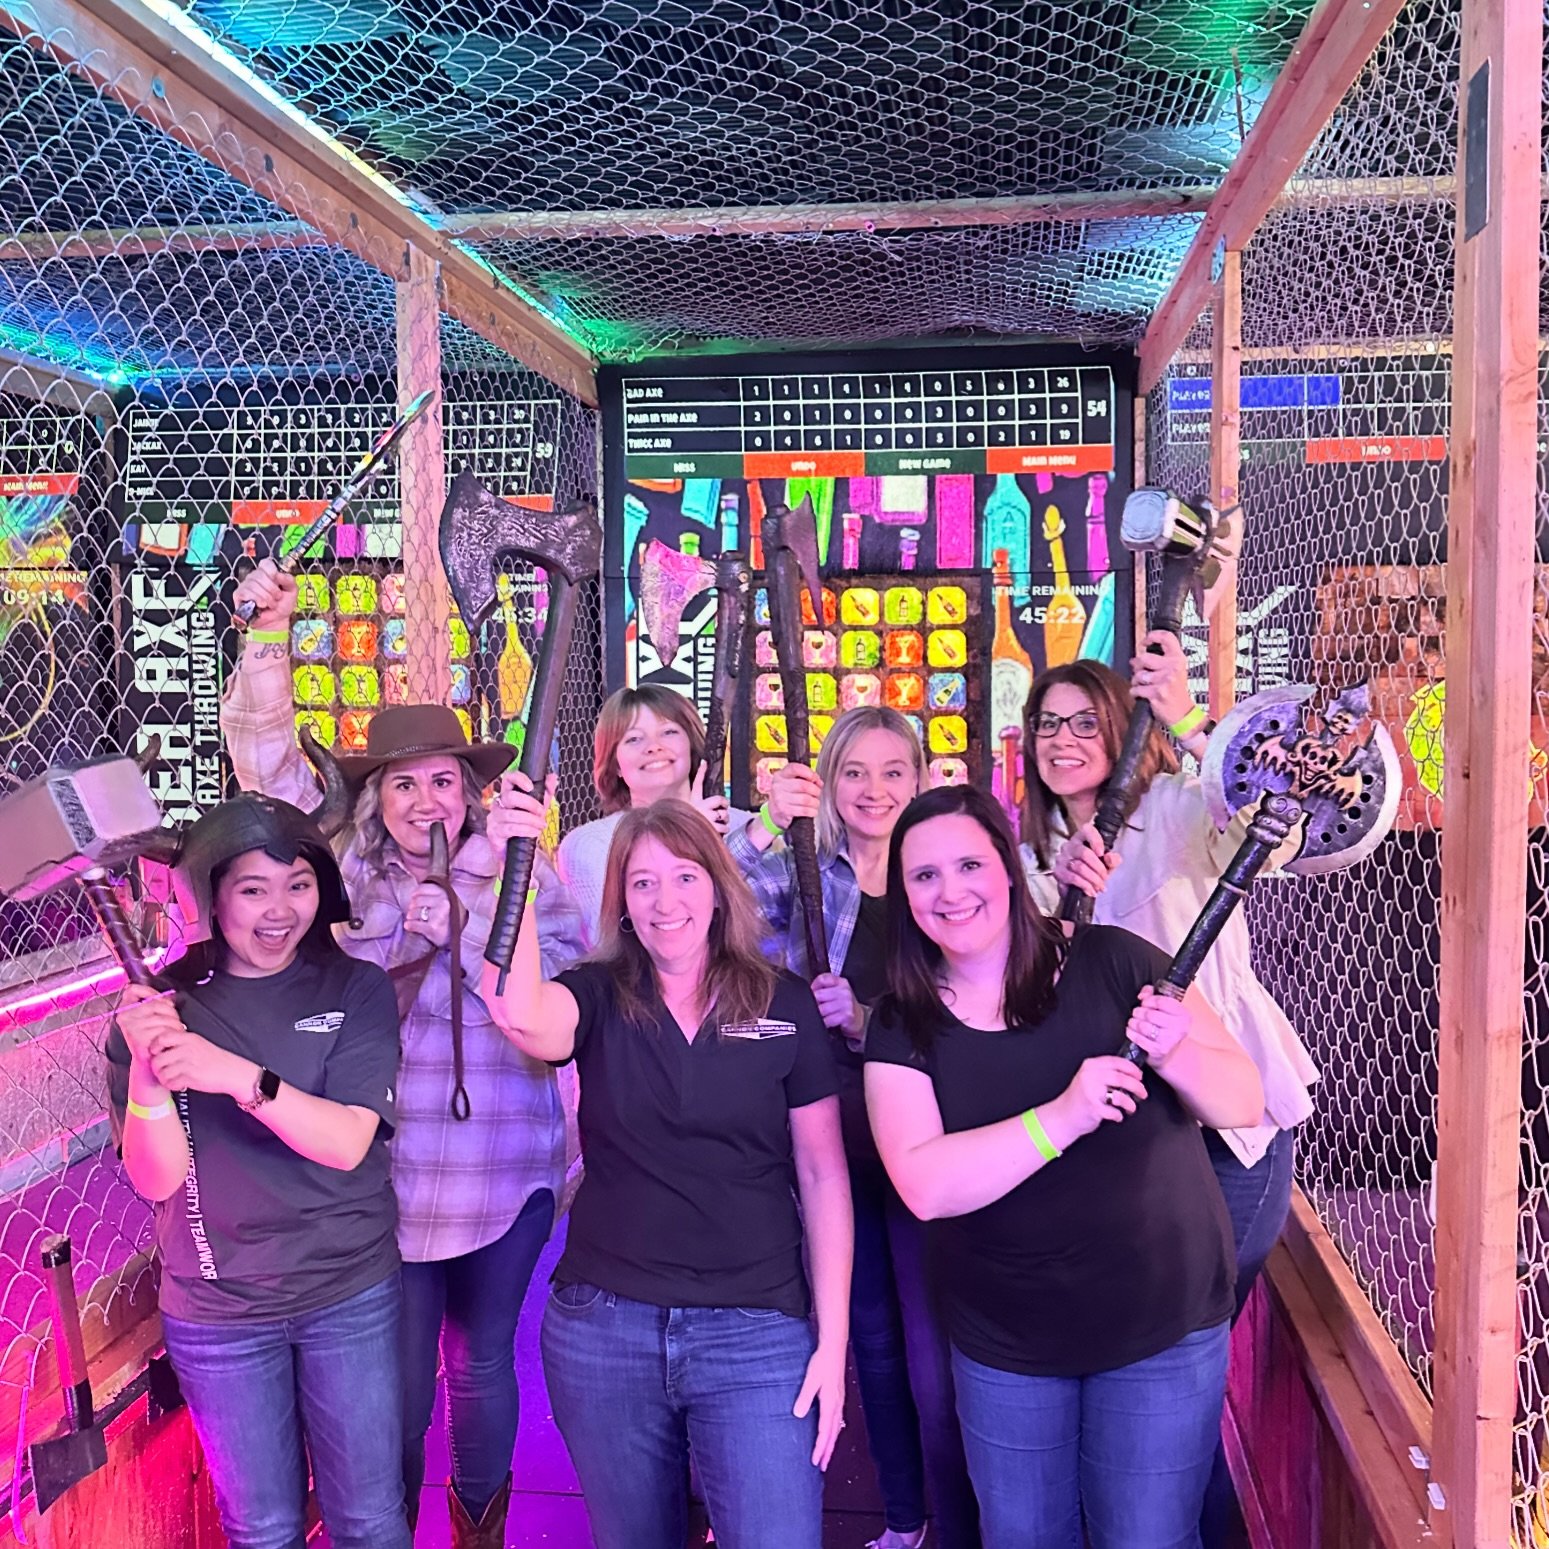 This Mothers Day moms throw for FREE! Show mom she&rsquo;s a cut above the rest 🔪🎯 (must be accompanied by regular price thrower to throw for free) #axethrowing #mothersday #exploreauburn